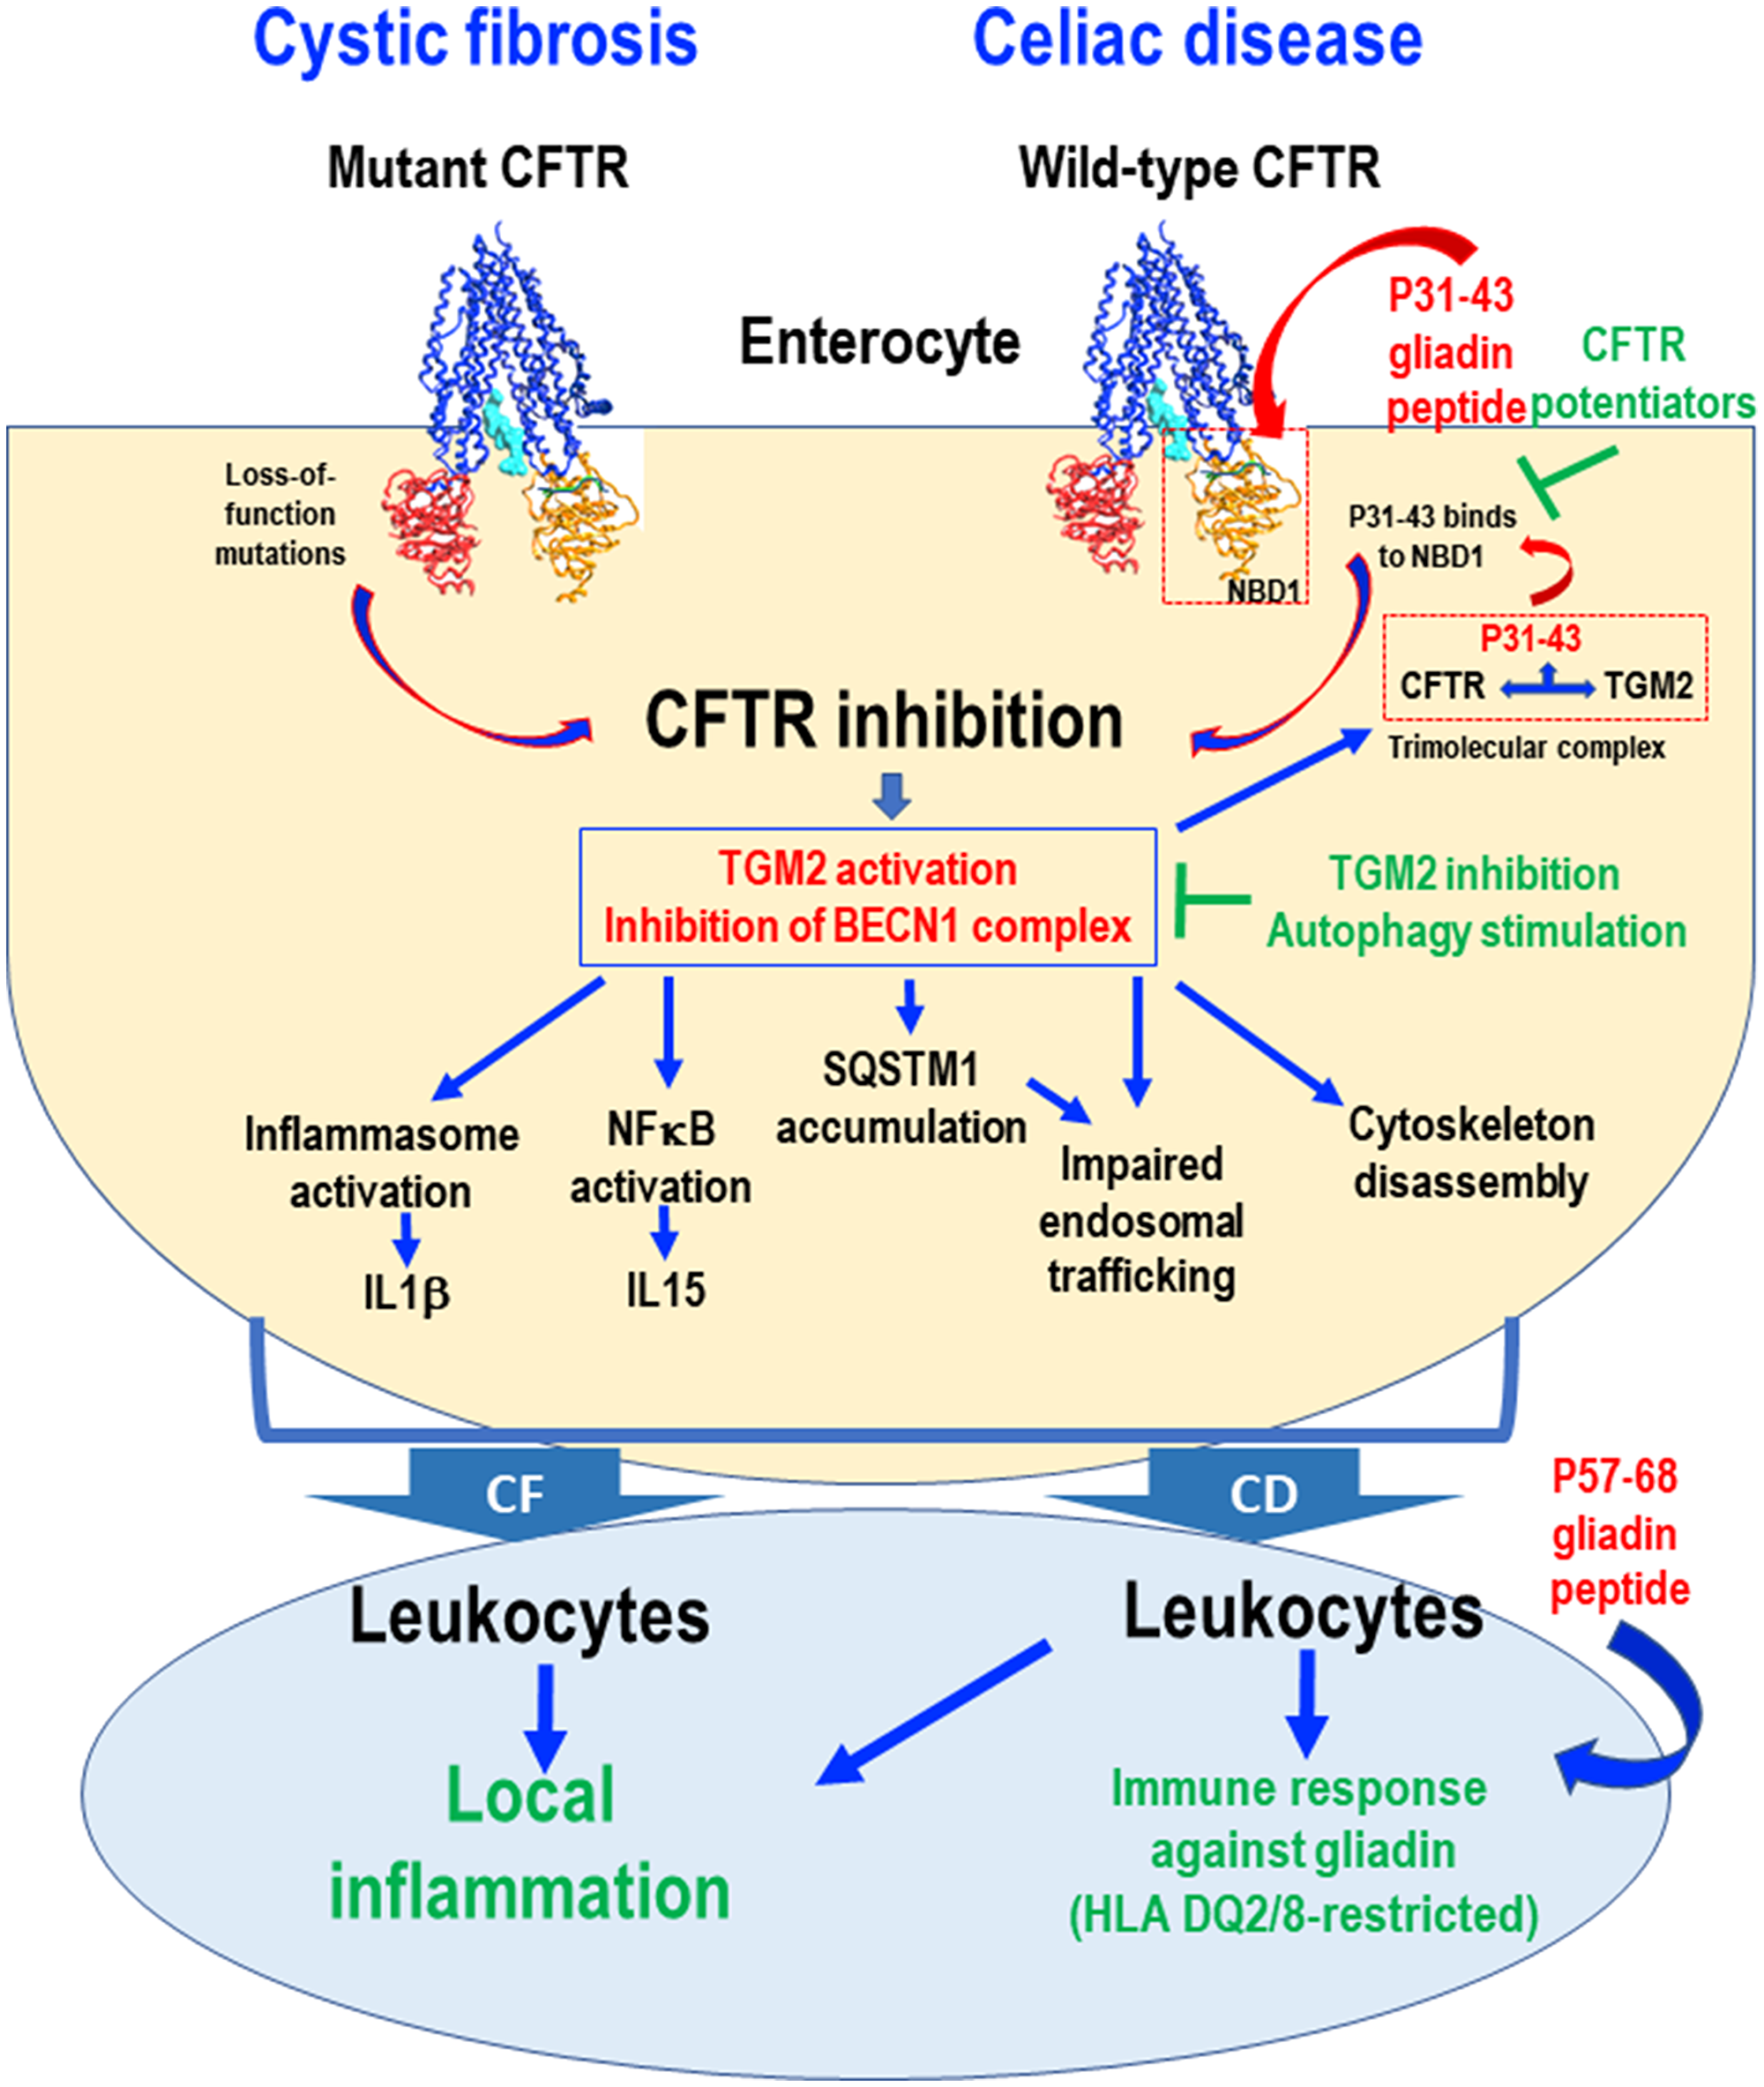 Schematic view of common pathogenic events downstream of CFTR inhibition in cystic fibrosis (CF) and celiac disease (CD).